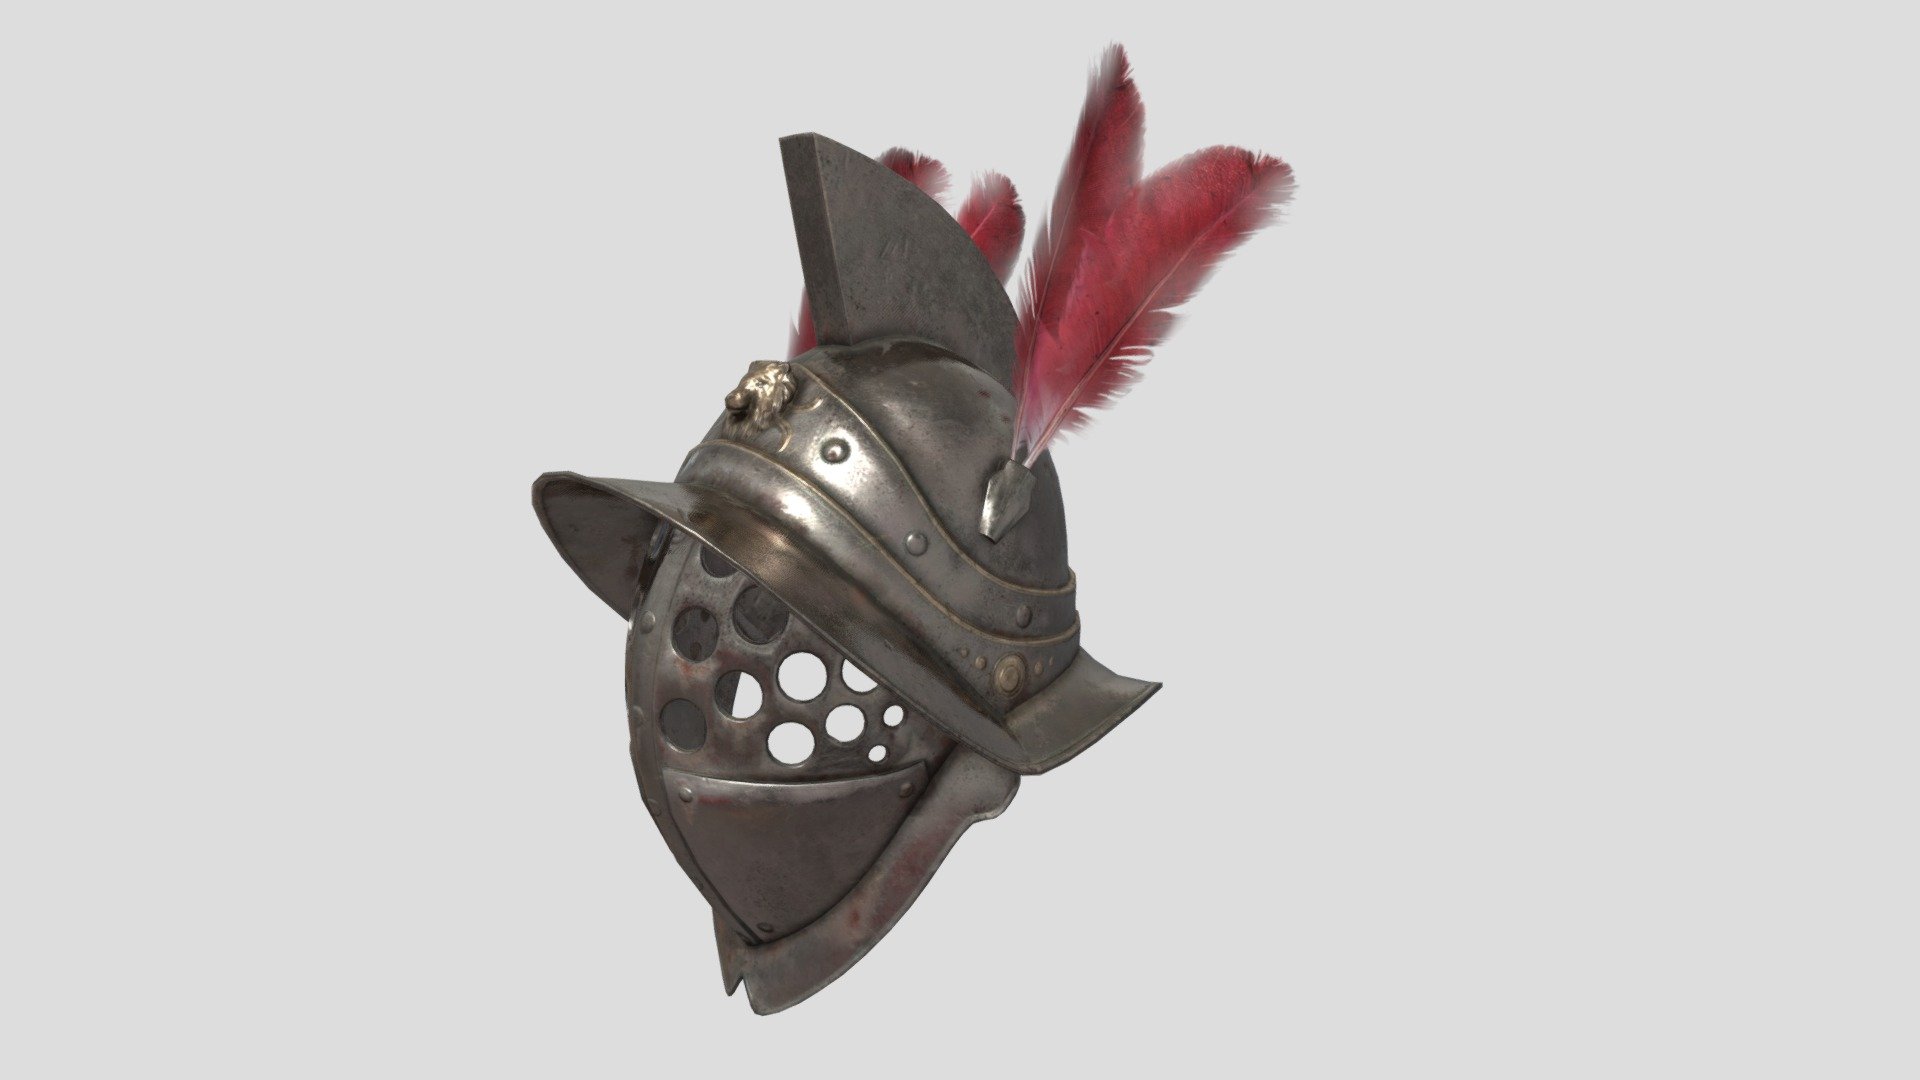 Gladiators Helmet
The model has an optimized low poly mesh with the greatest possible number of simplifications that do not affect photo-realism but can help to simplify it, thus lightening your scene and allowing for using this model in real-time 3d applications.

Real-world accurate model.  In this product, all objects are ERROR-FREE and All LEGAL Geometry. Subdivisions are not required for this product.

Perfect for Architectural, Product visualization, Game Engine, and VR (Virtual Reality) No Plugin Needed.

Format Type




3ds Max 2017 (standard shader)

FBX

OBJ

3DS

Texture

2 material used. 2 different sets of textures:




Diffuse

Alpha

Normal

Specular

Gloss

Specular n Gloss [.tga additional texture]

You might need to re-assign textures map to model in your relevant software - Gladiators Helmet - Buy Royalty Free 3D model by luxe3dworld 3d model